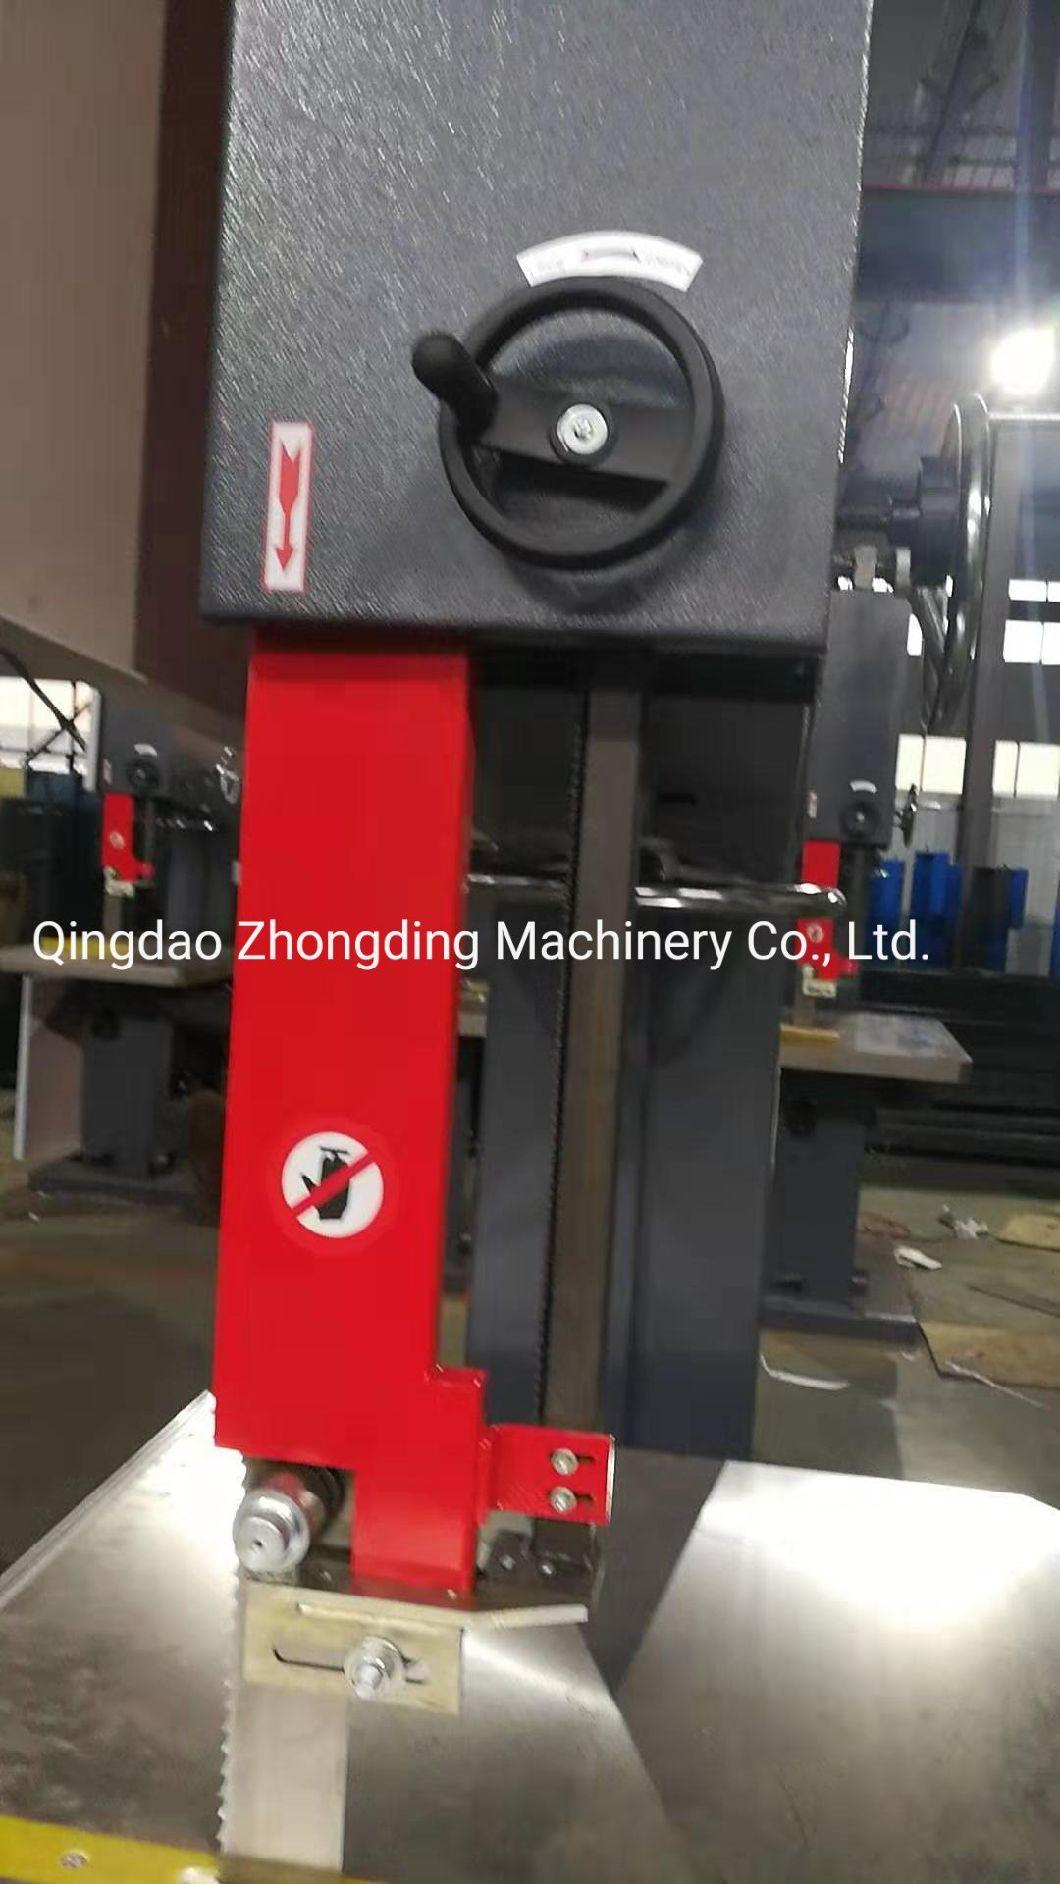 Woodworking Band Saw with 500mm Saw Wheel